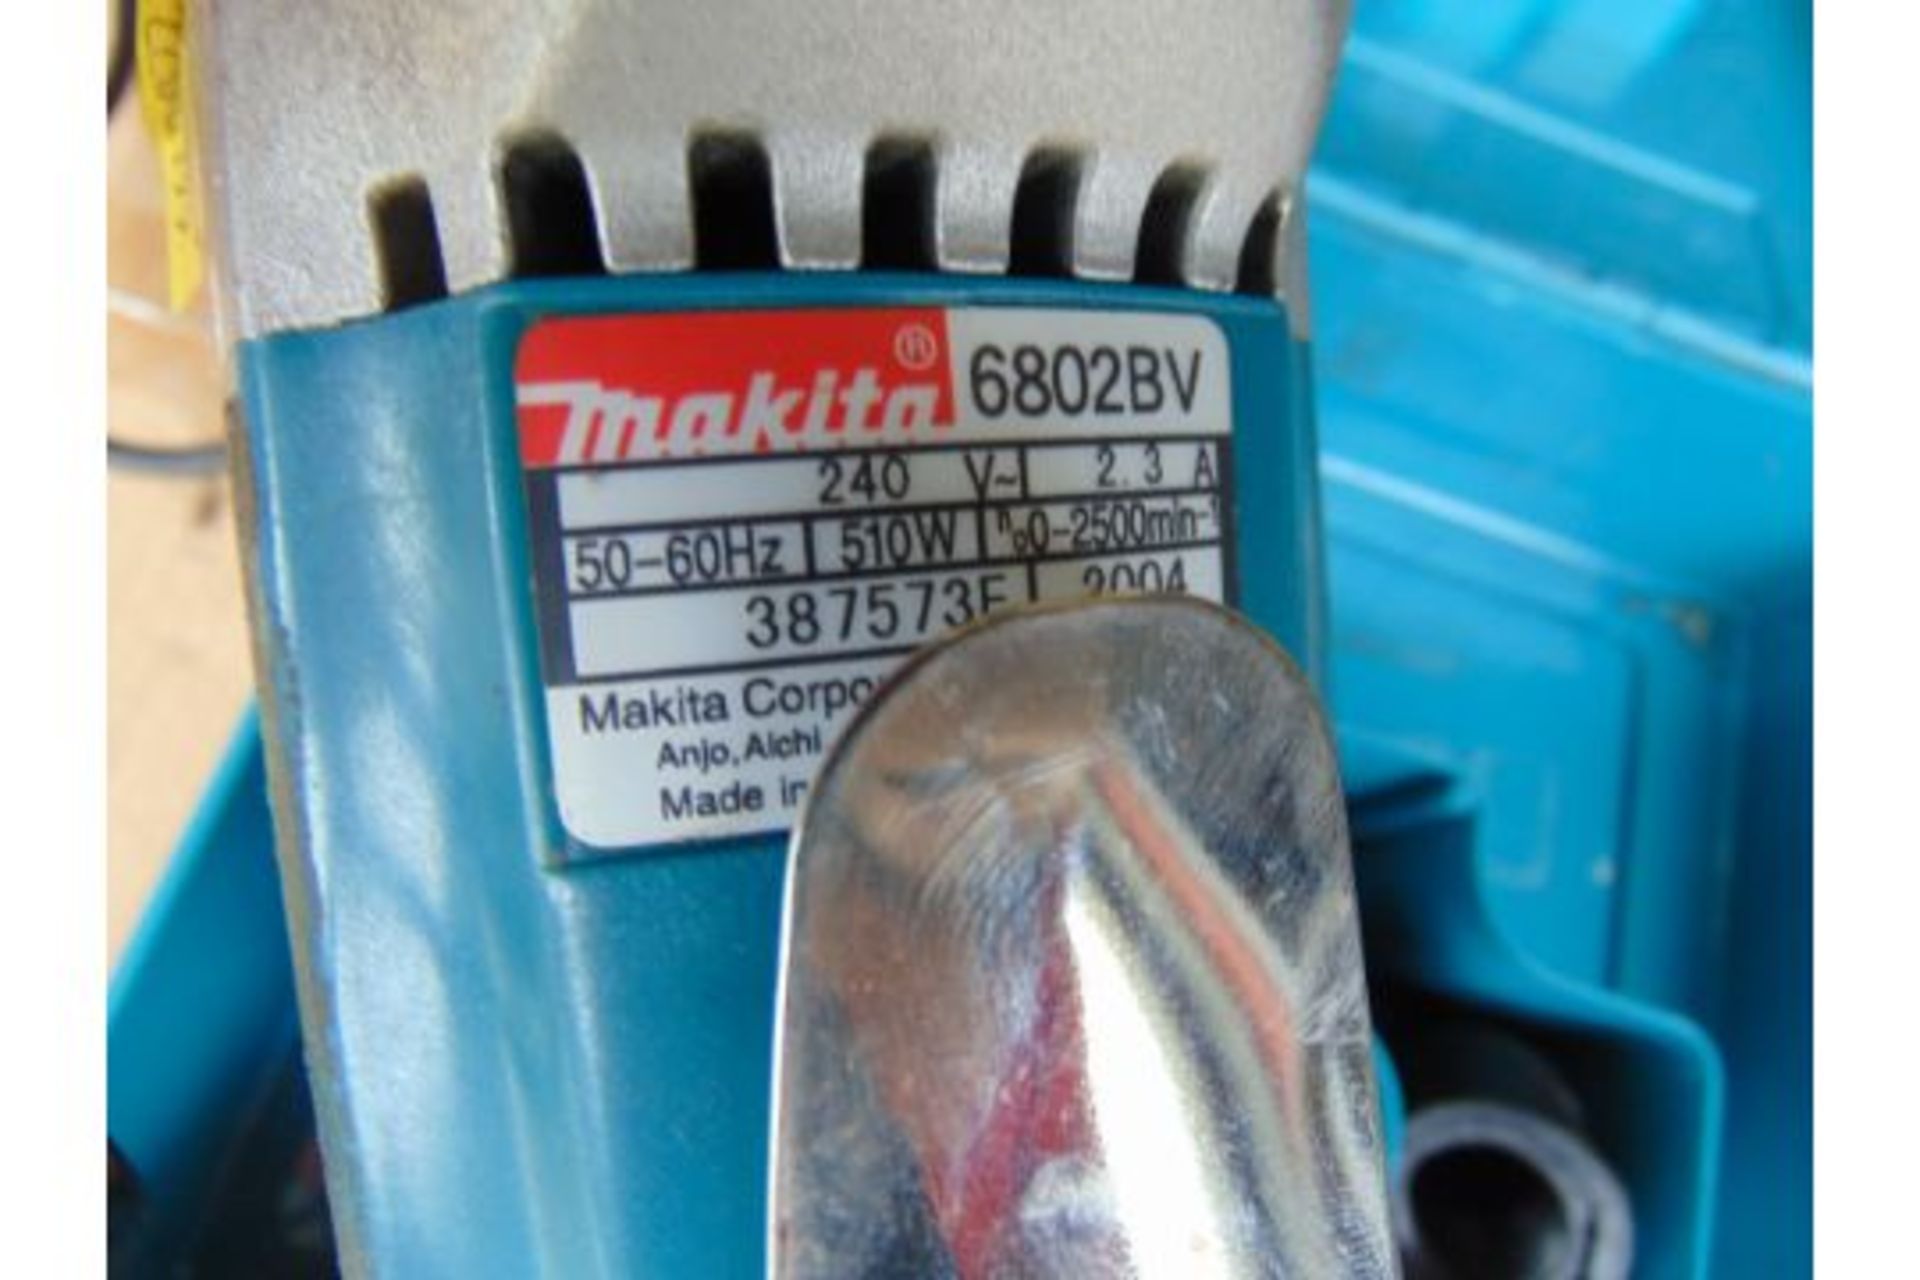 Makita 240v Model 6802BV Electric Wrench / Screw Driver from UK Fire Service Workshop in Case - Image 5 of 5